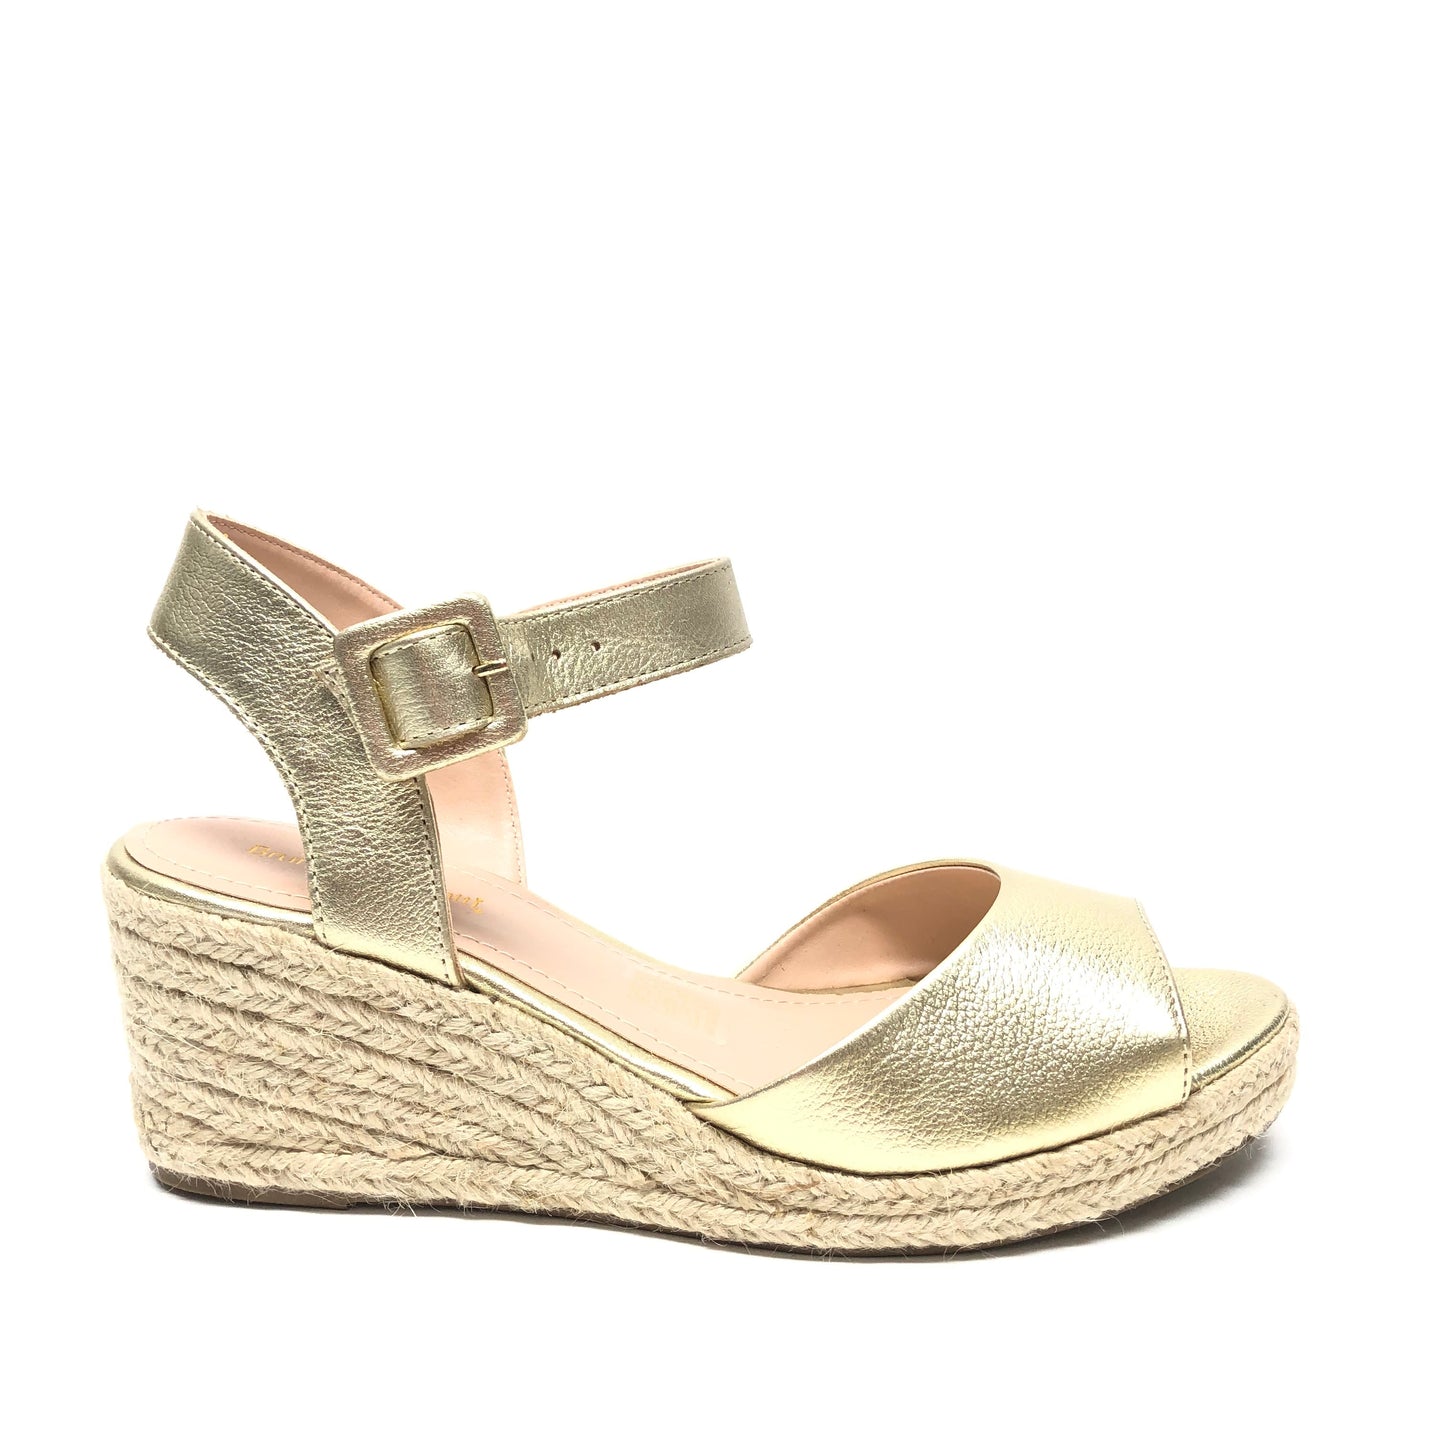 Gold Sandals Heels Wedge Clothes Mentor, Size 8